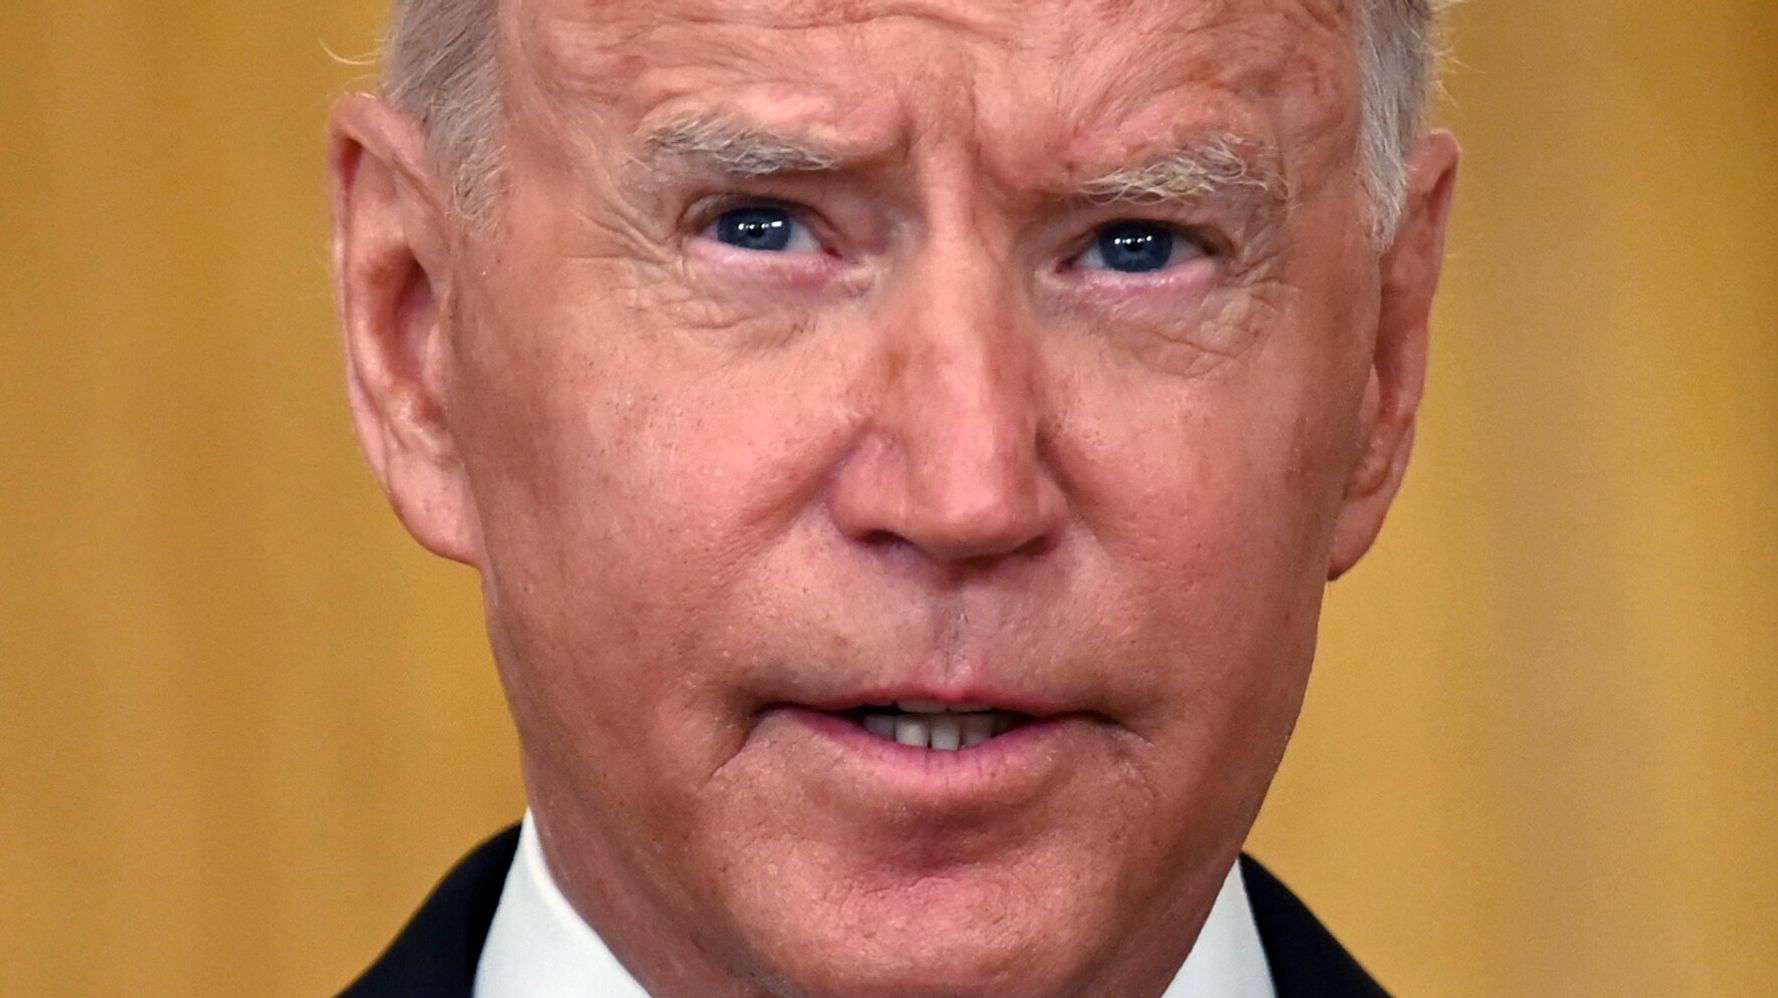 image for Biden Tells States That Ban Masks In Schools To Brace For 'Legal Action'